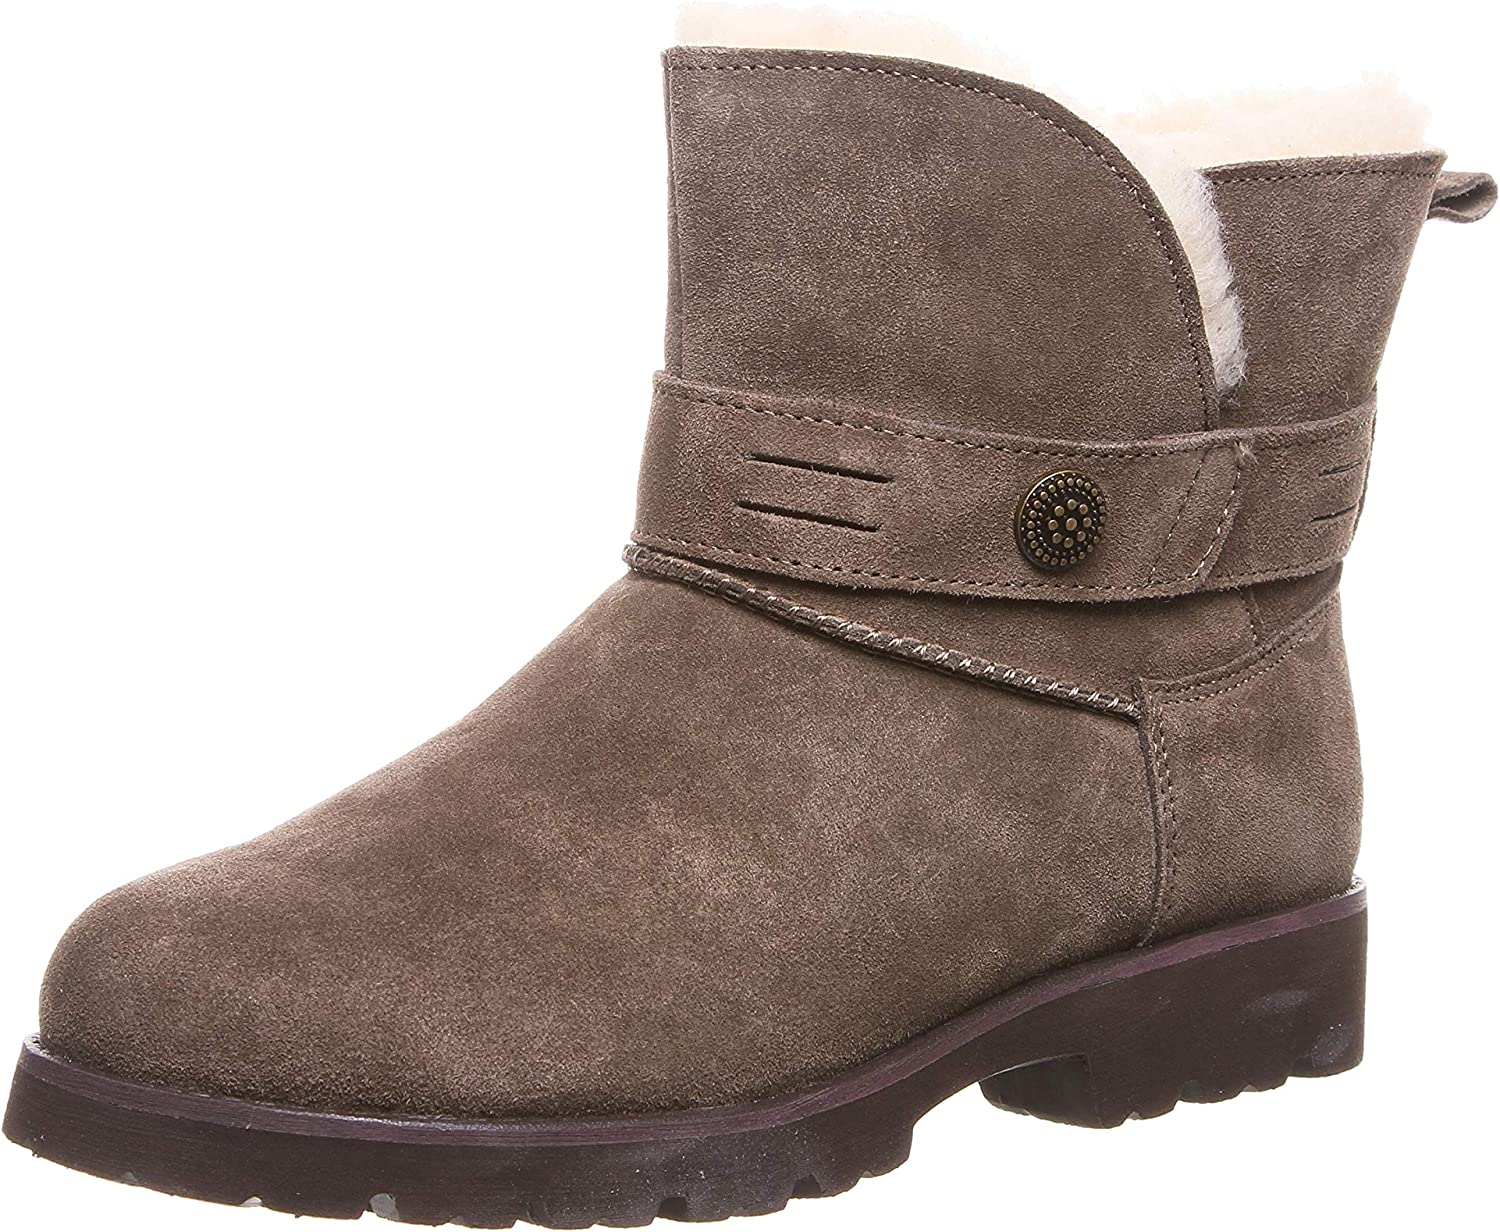 BEARPAW Womens Wellston Suede Slip On Ankle Boots - Seal Brown - 8